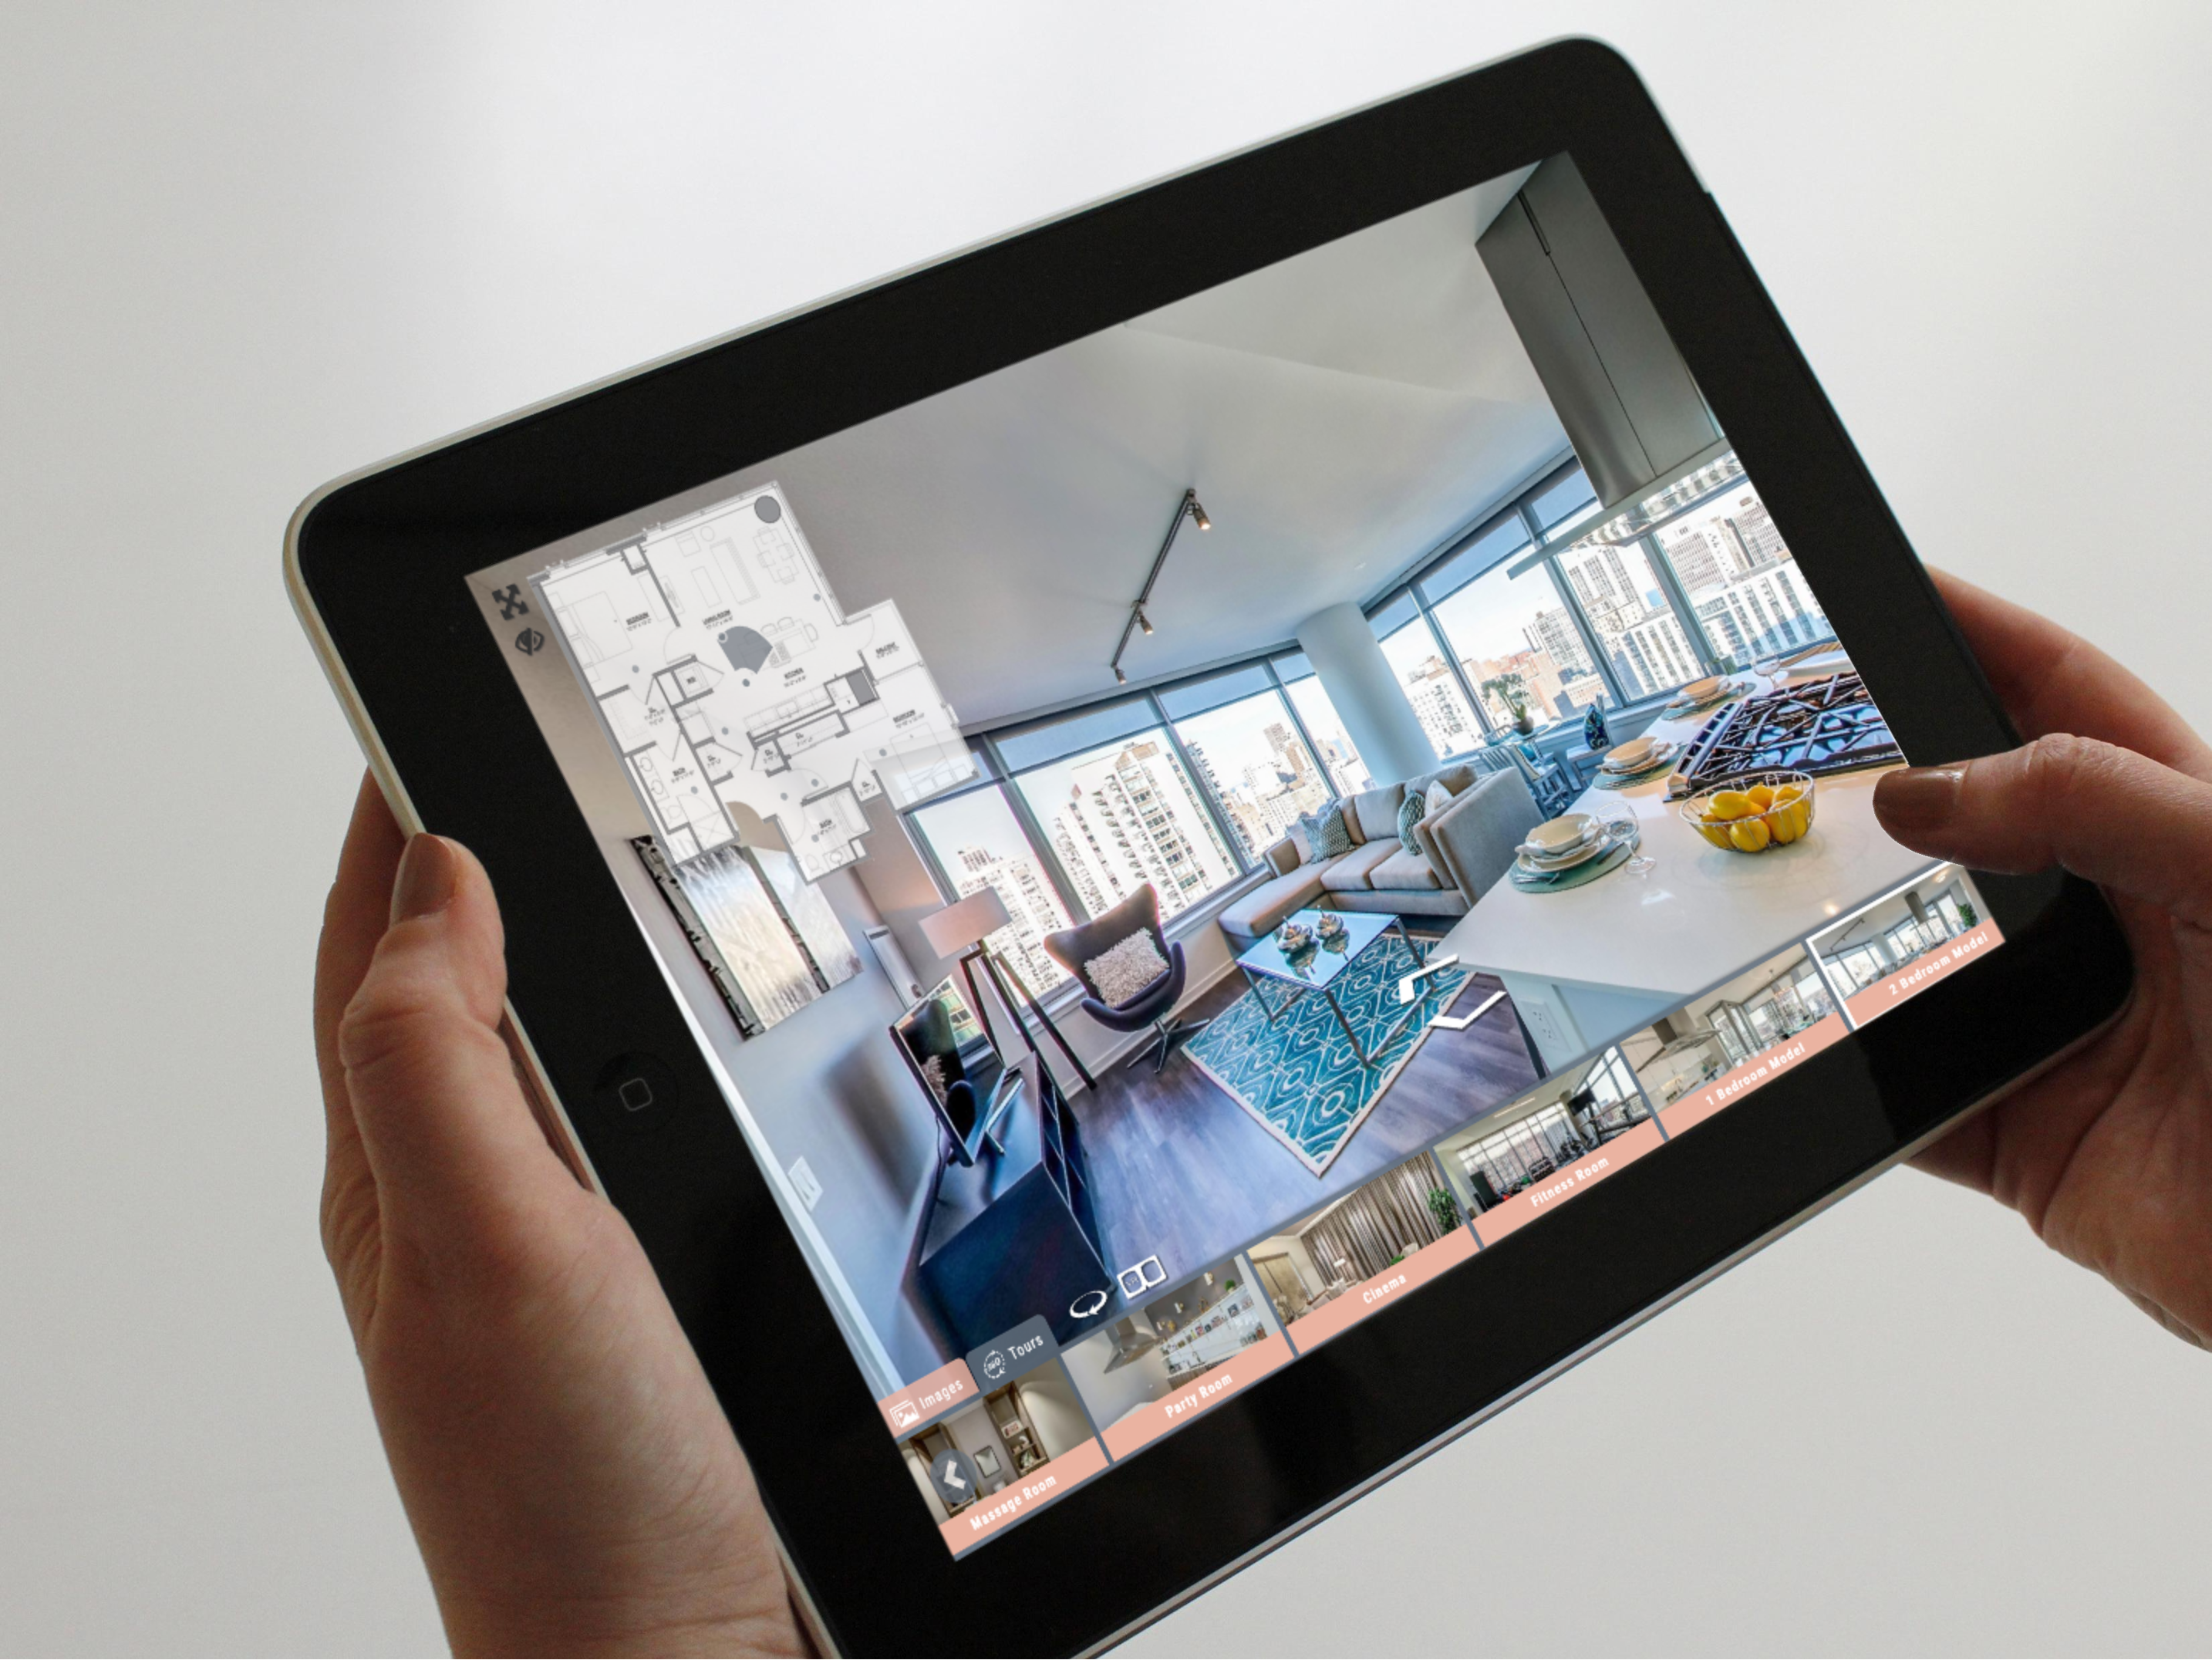 The Top 5 Questions to Ask if You’re Considering a Virtual Tour